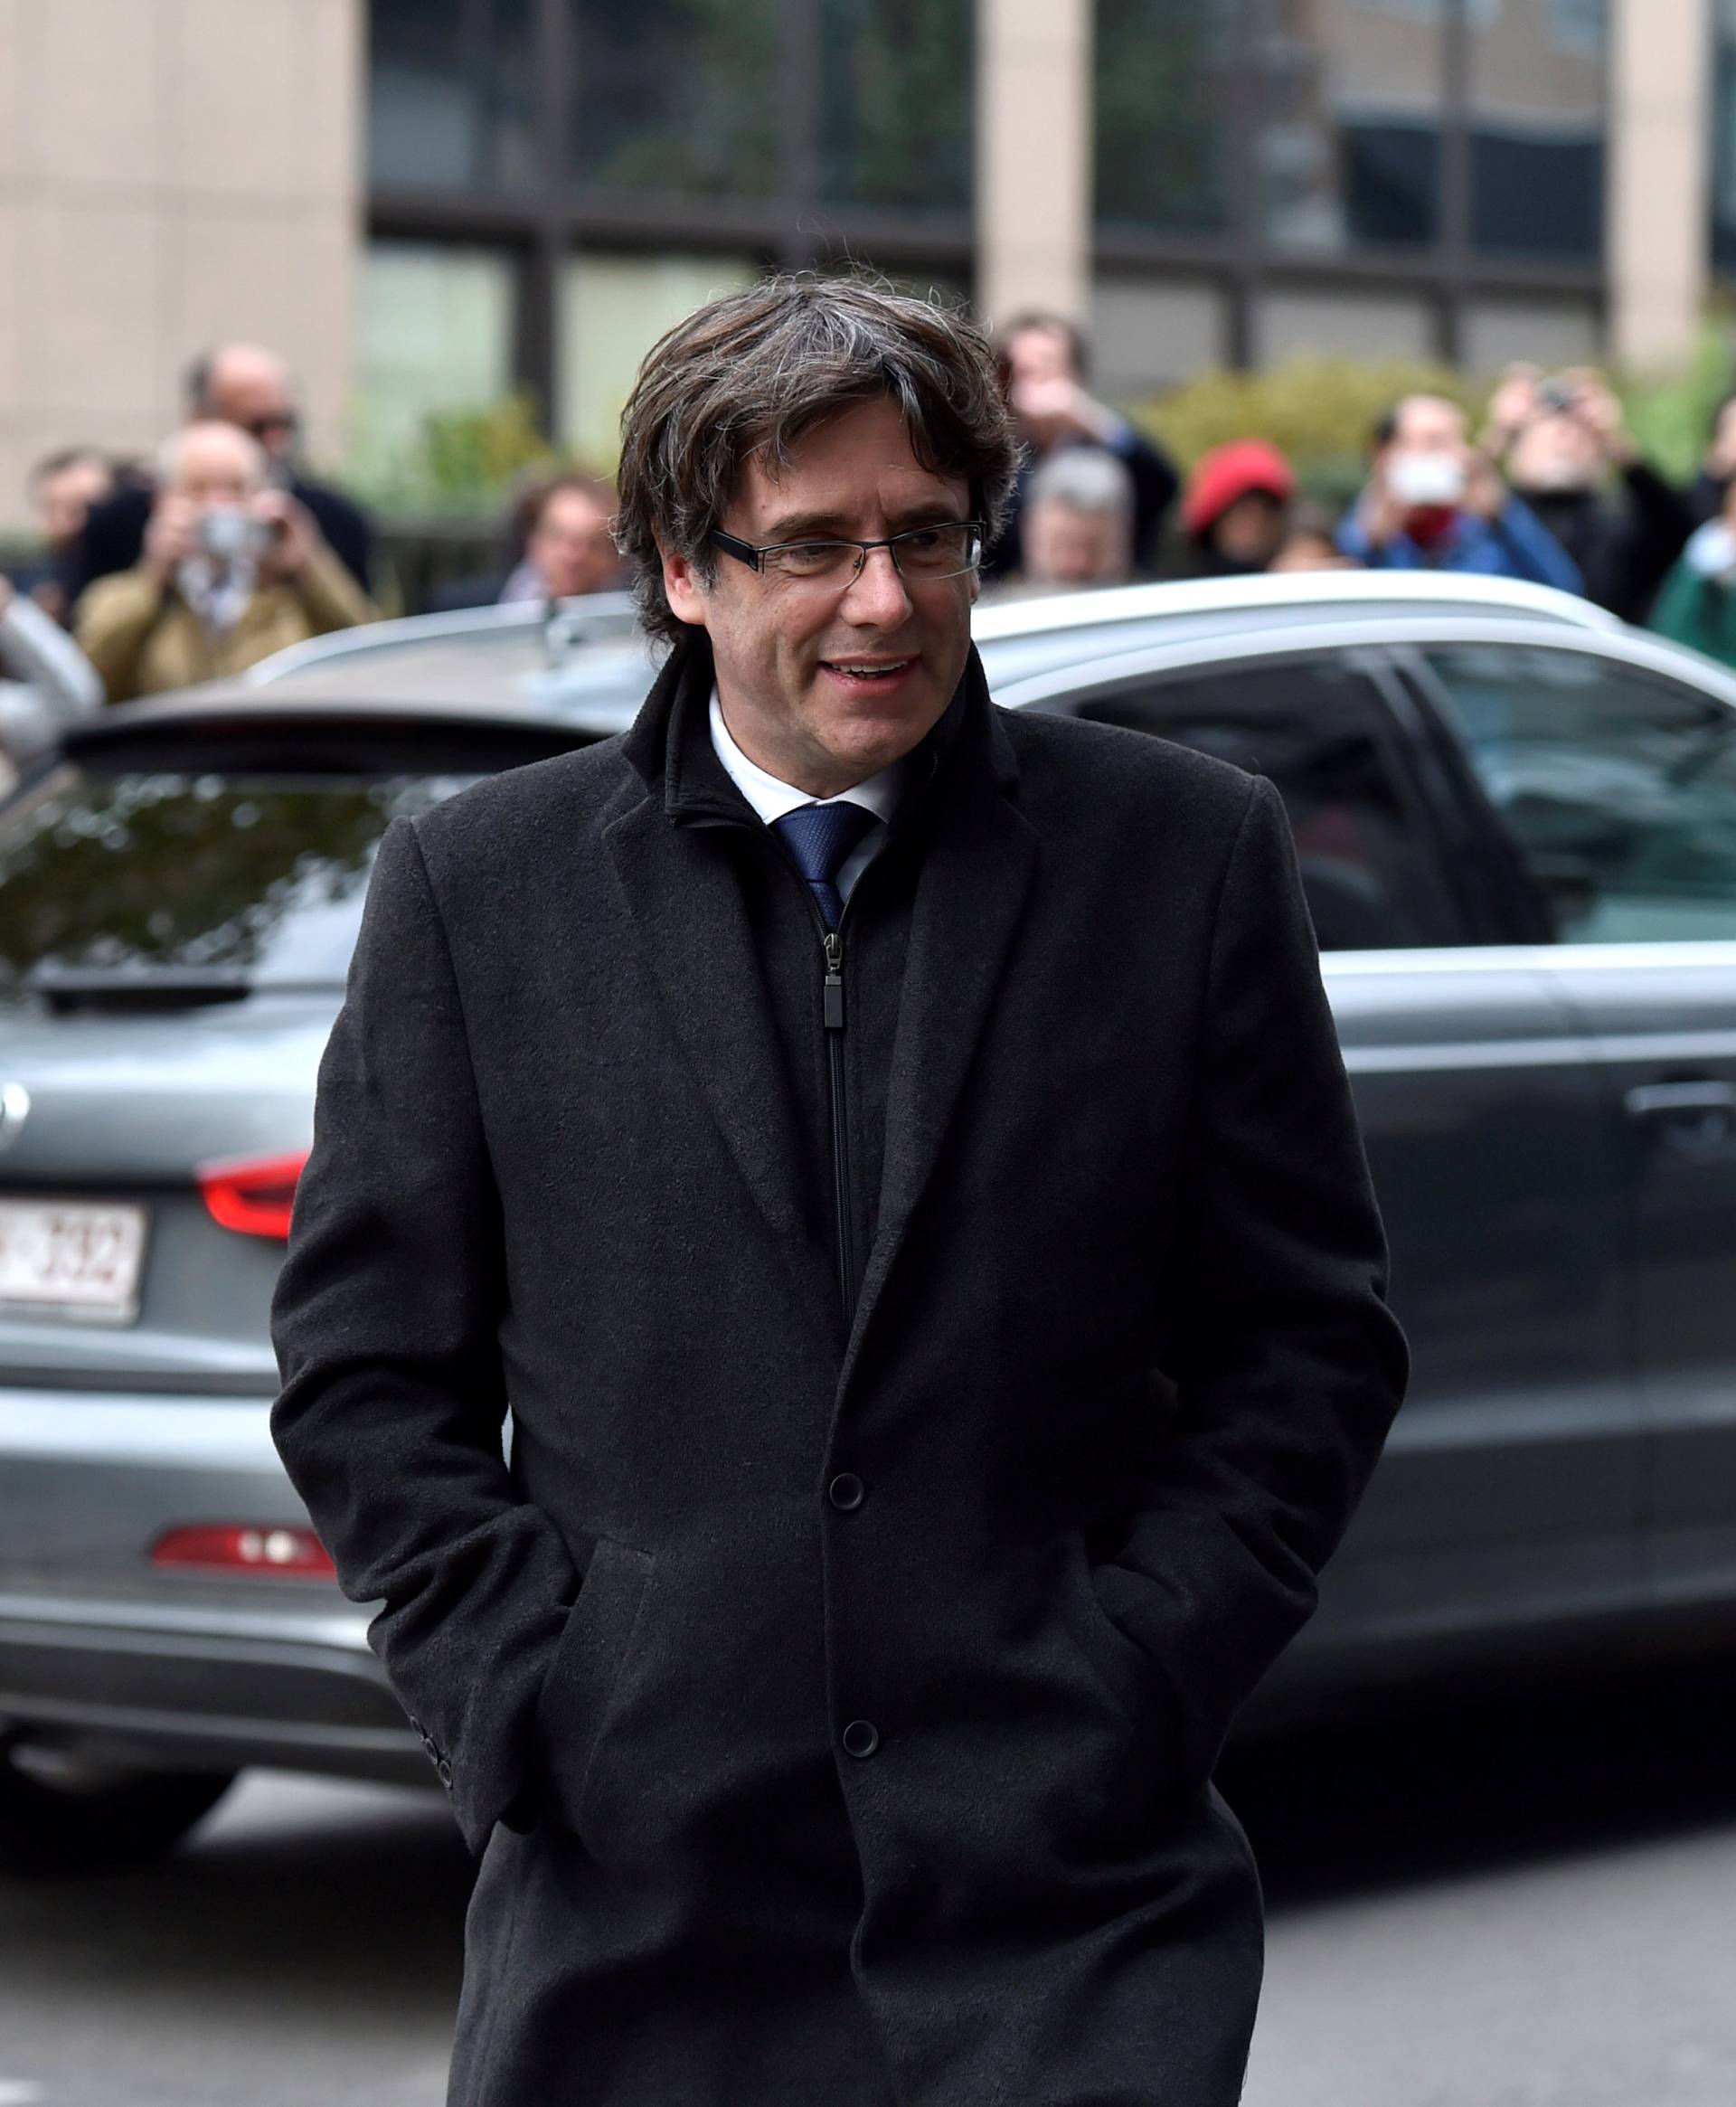 Carles Puigdemont arrives for a news conference in Brussels